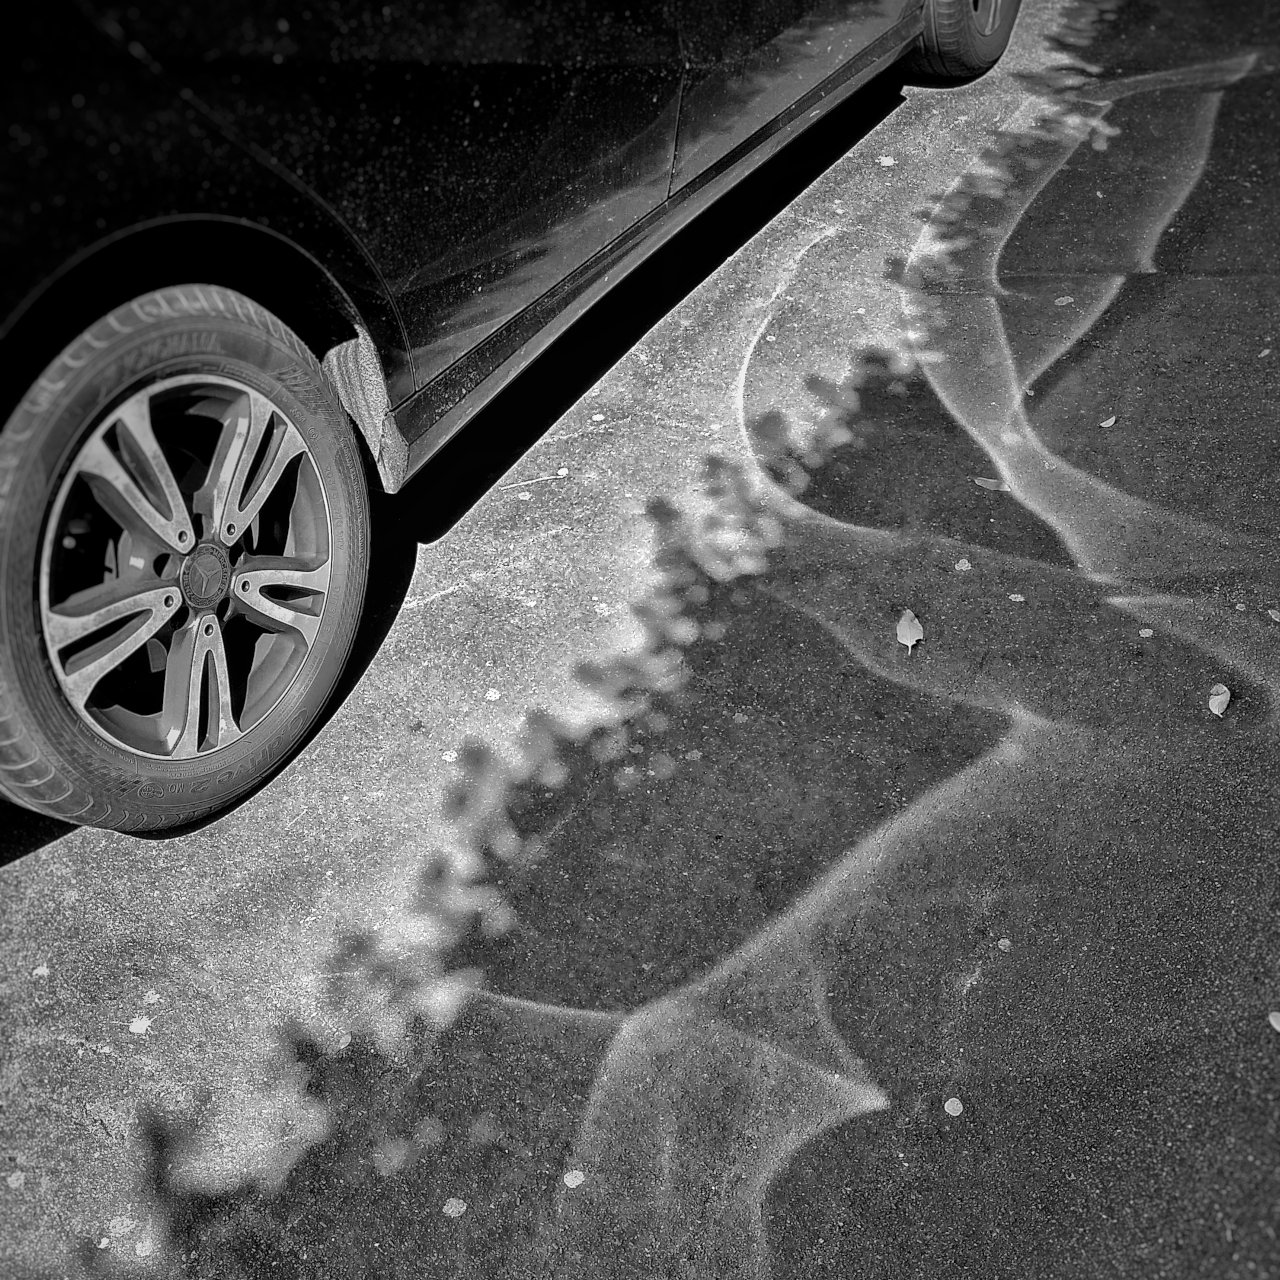 Black and white photo of a wheel and side of a car, with rippling reflections of sunlight being cast onto the nearby pavement